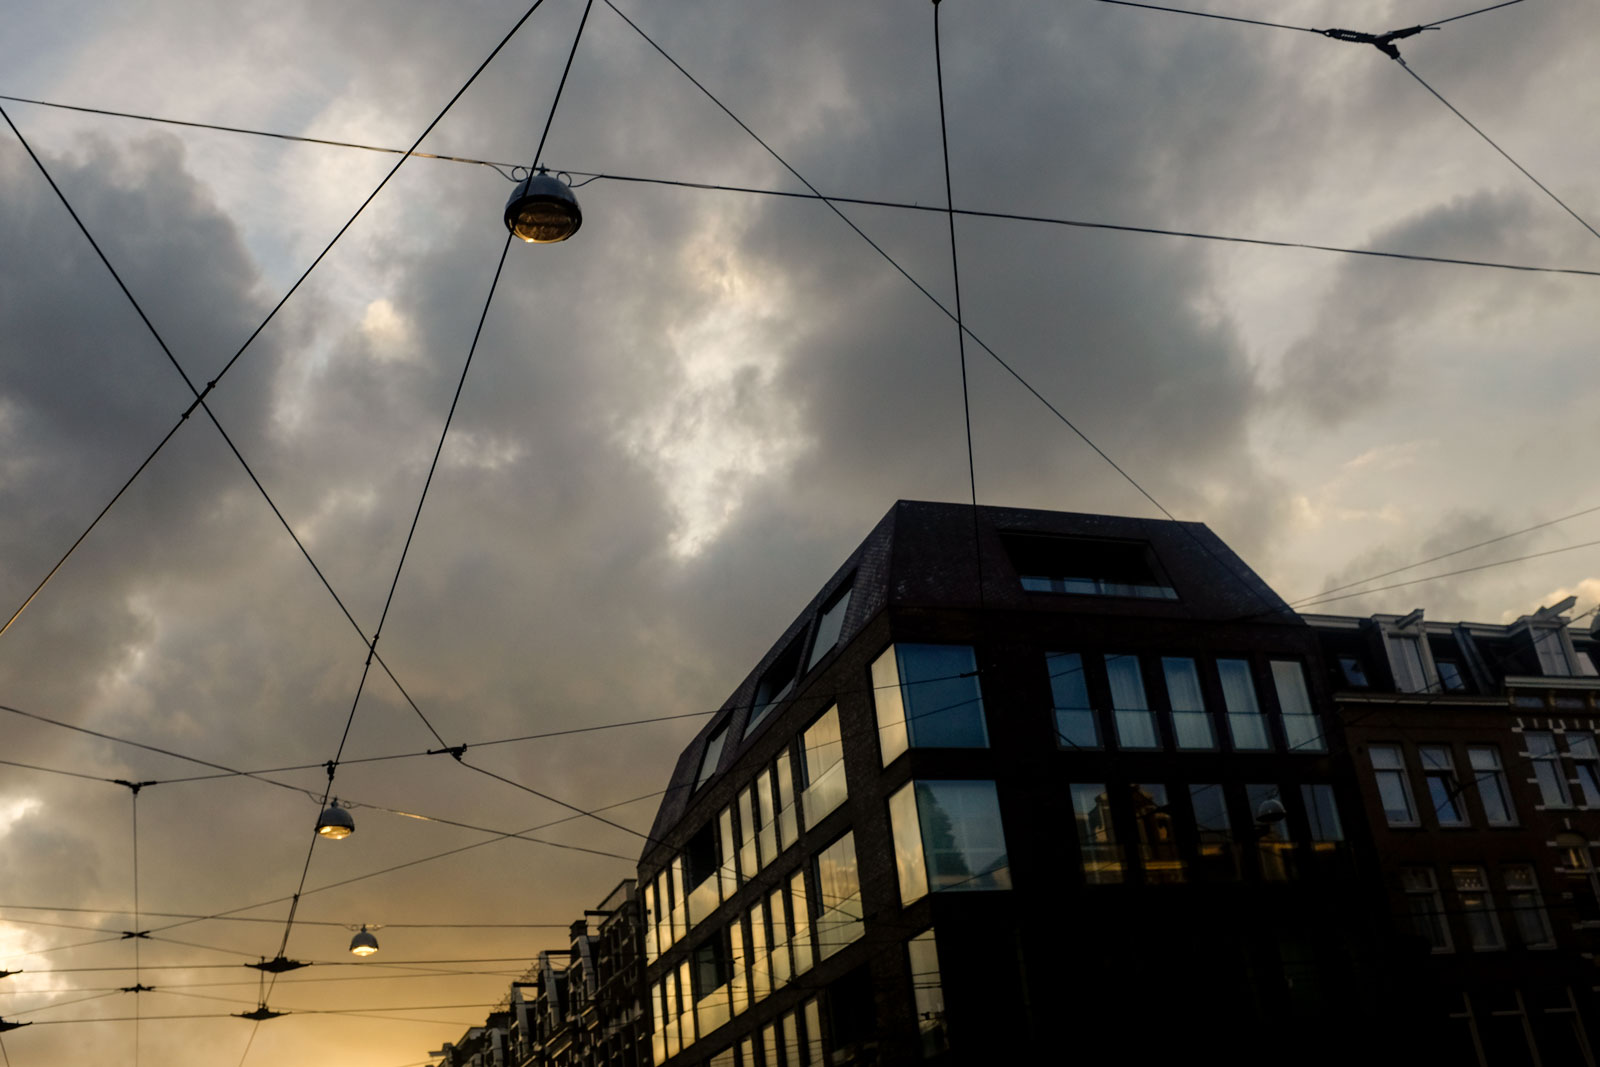 Tram lines in the sky at sunset in Amsterdam